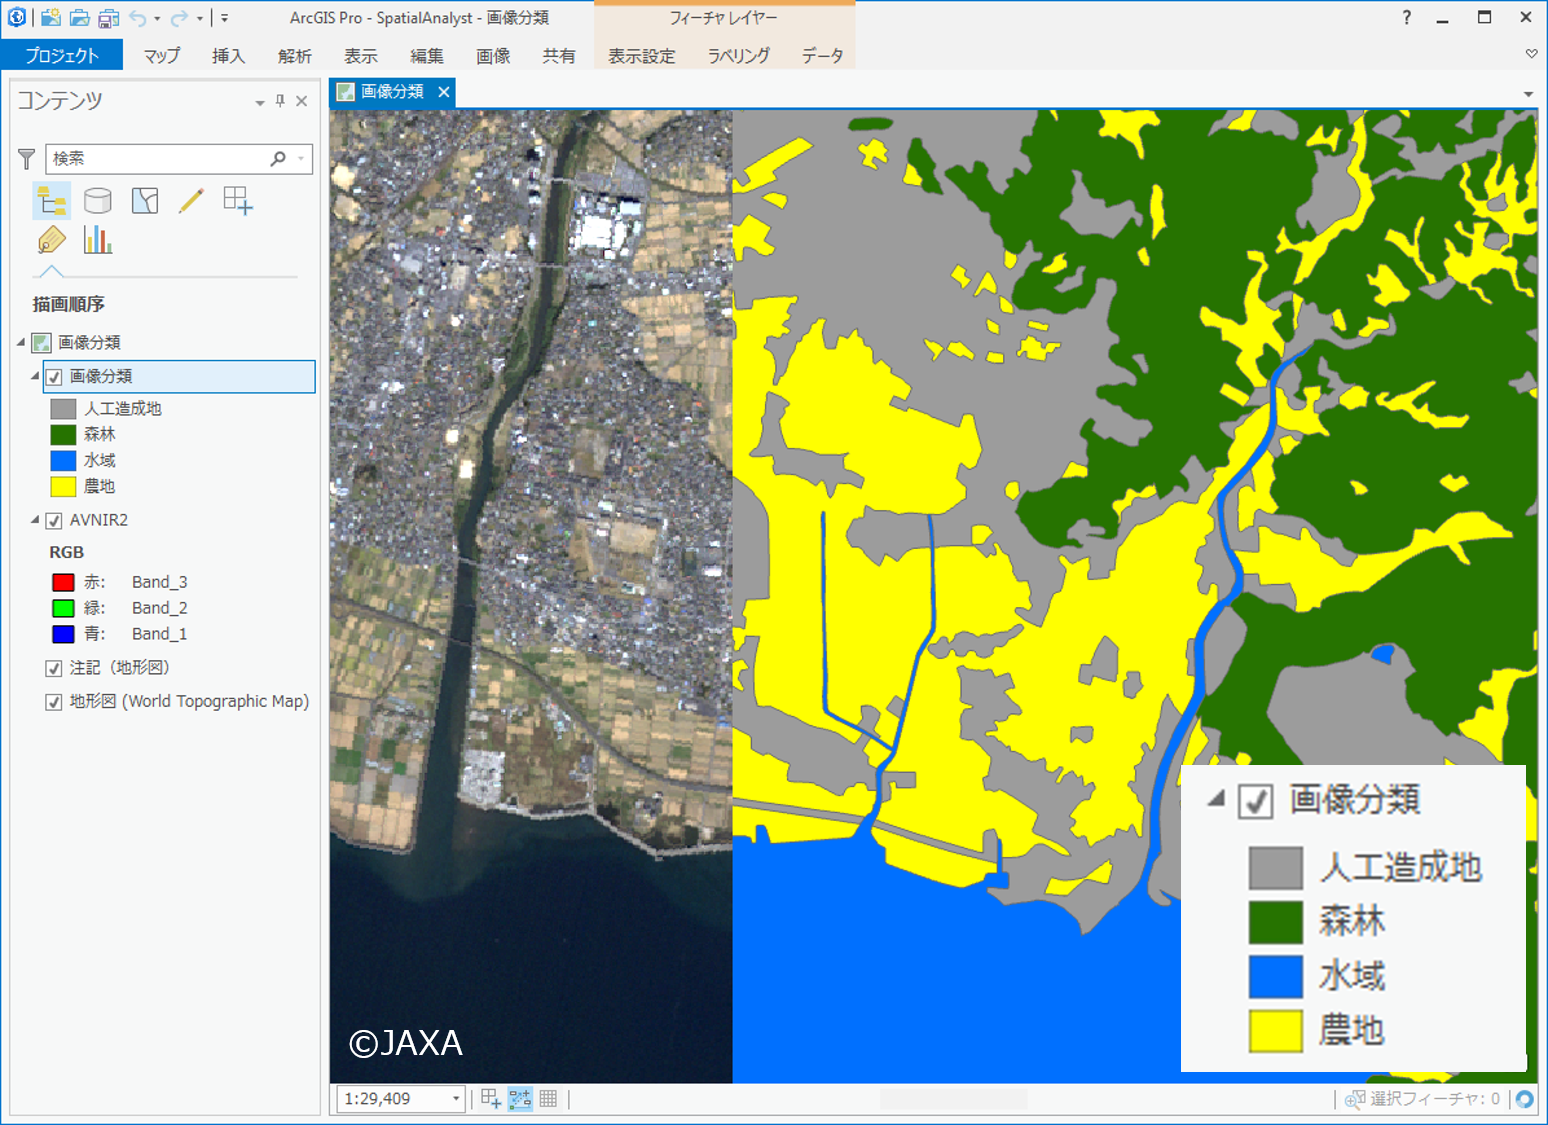 ArcGIS Spatial Analyst